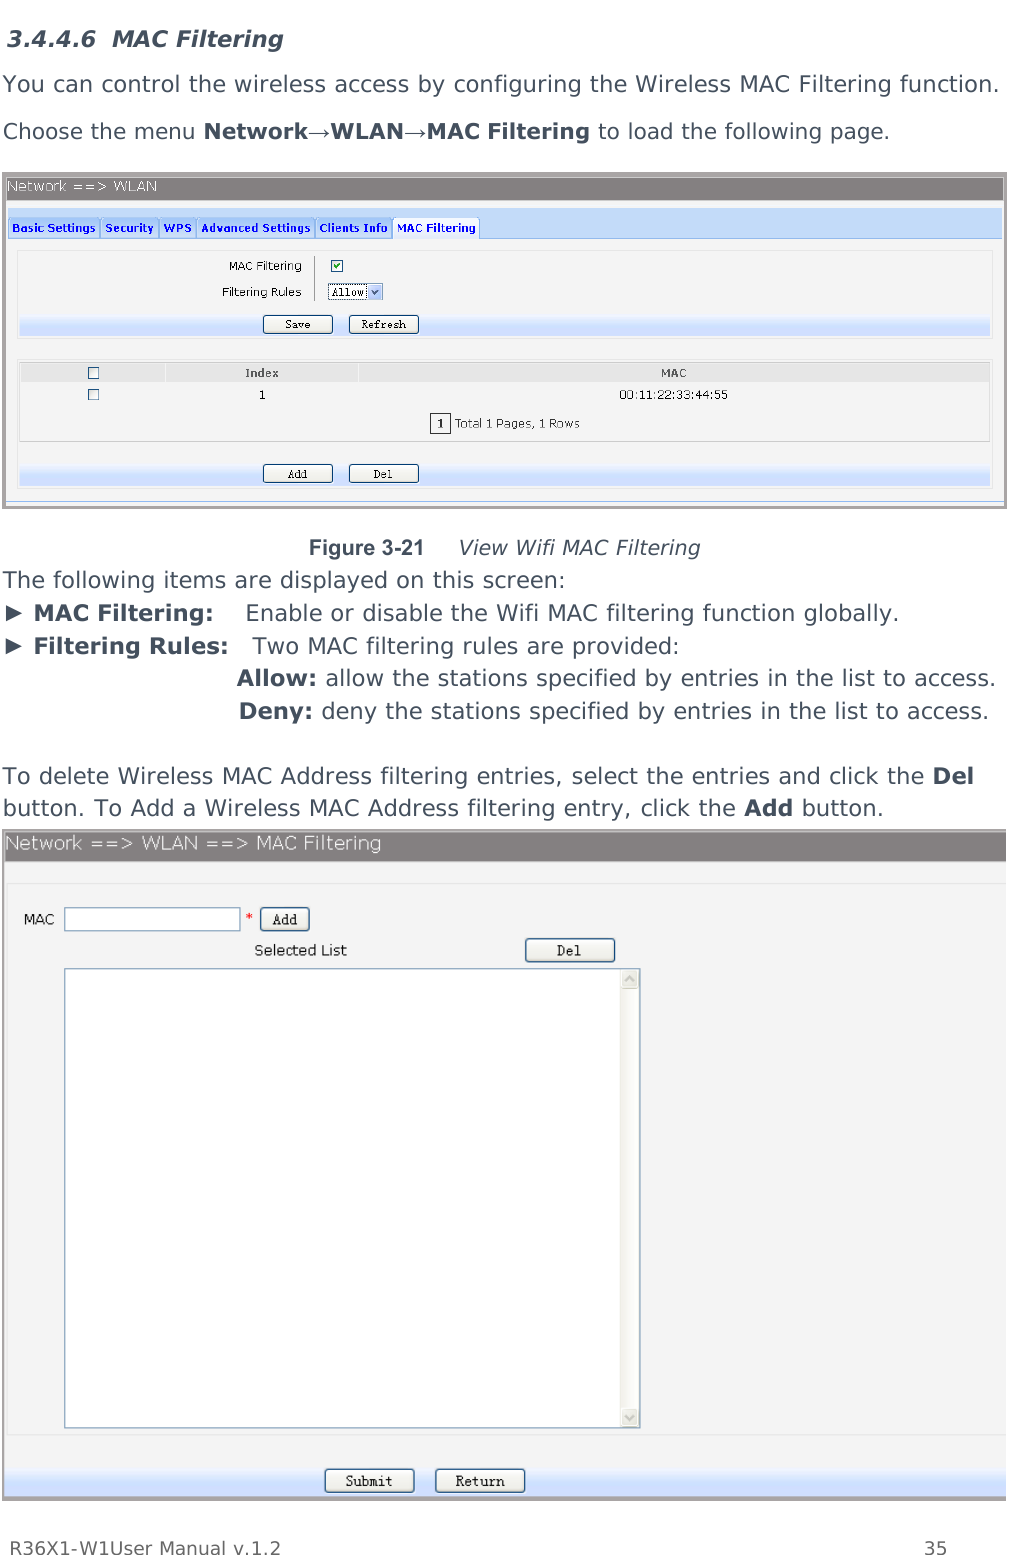           R36X1-W1User Manual v.1.2    35  3.4.4.6 MAC Filtering You can control the wireless access by configuring the Wireless MAC Filtering function. Choose the menu Network→WLAN→MAC Filtering to load the following page.  Figure 3-21  View Wifi MAC Filtering The following items are displayed on this screen: ► MAC Filtering:    Enable or disable the Wifi MAC filtering function globally. ► Filtering Rules:   Two MAC filtering rules are provided: Allow: allow the stations specified by entries in the list to access. Deny: deny the stations specified by entries in the list to access.  To delete Wireless MAC Address filtering entries, select the entries and click the Del button. To Add a Wireless MAC Address filtering entry, click the Add button.  